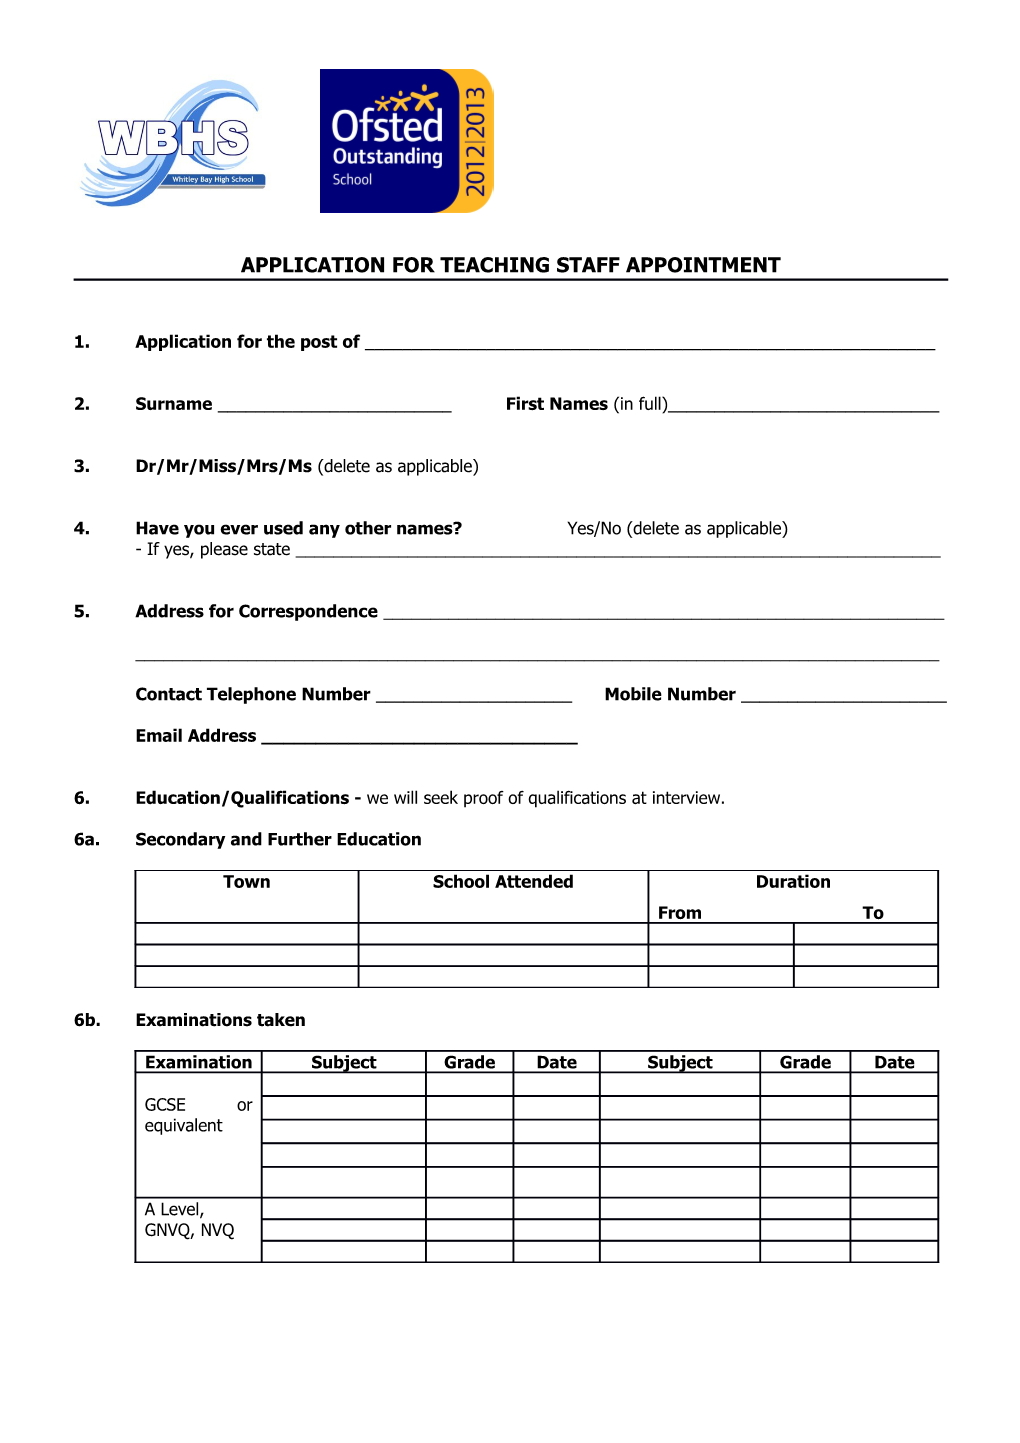 Application for Teaching Staff Appointment